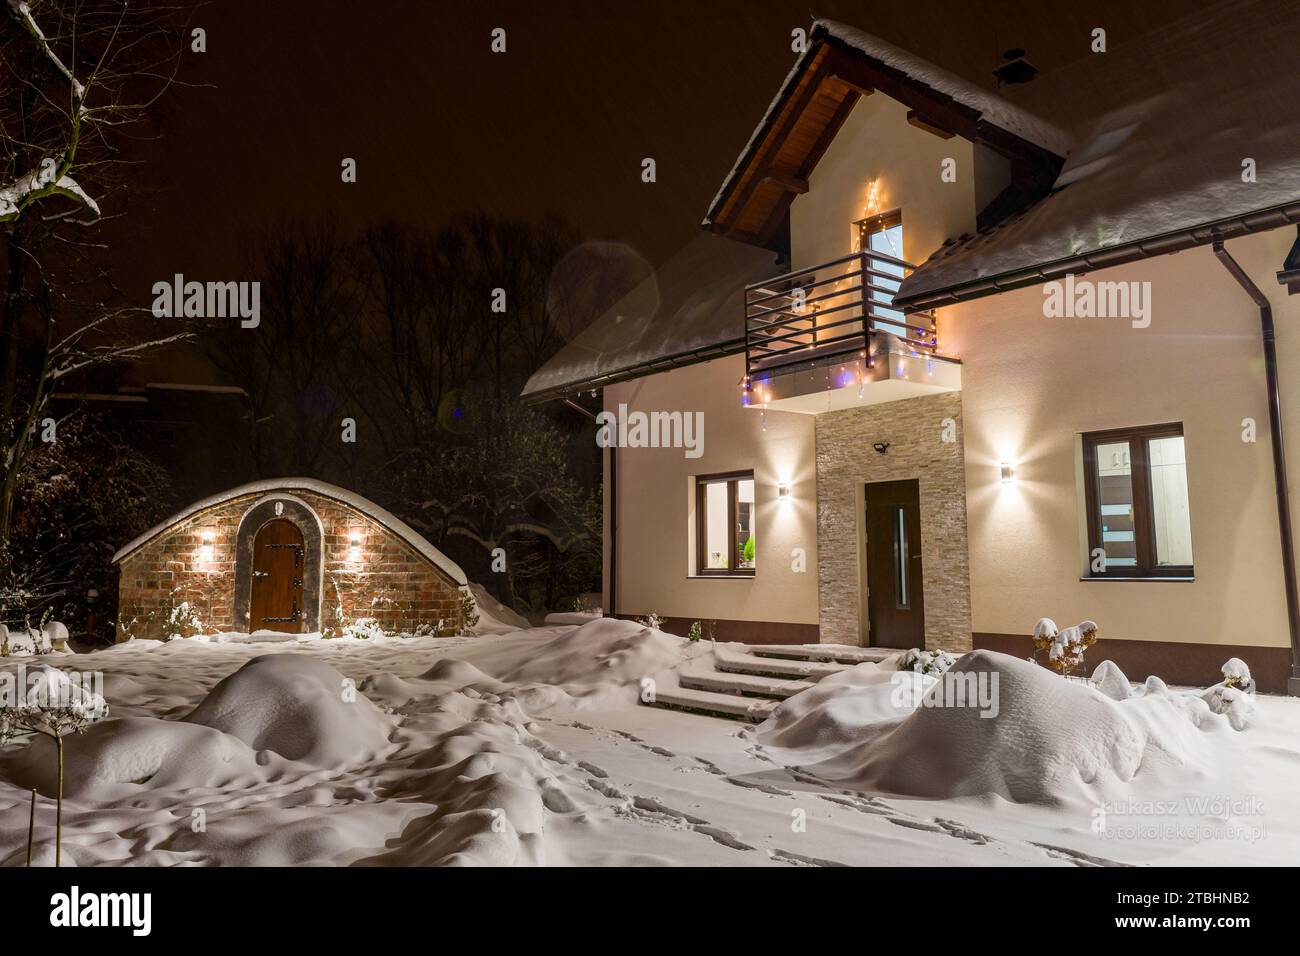 Single-family house with wine cellar, dugout in winter scenery at night Stock Photo